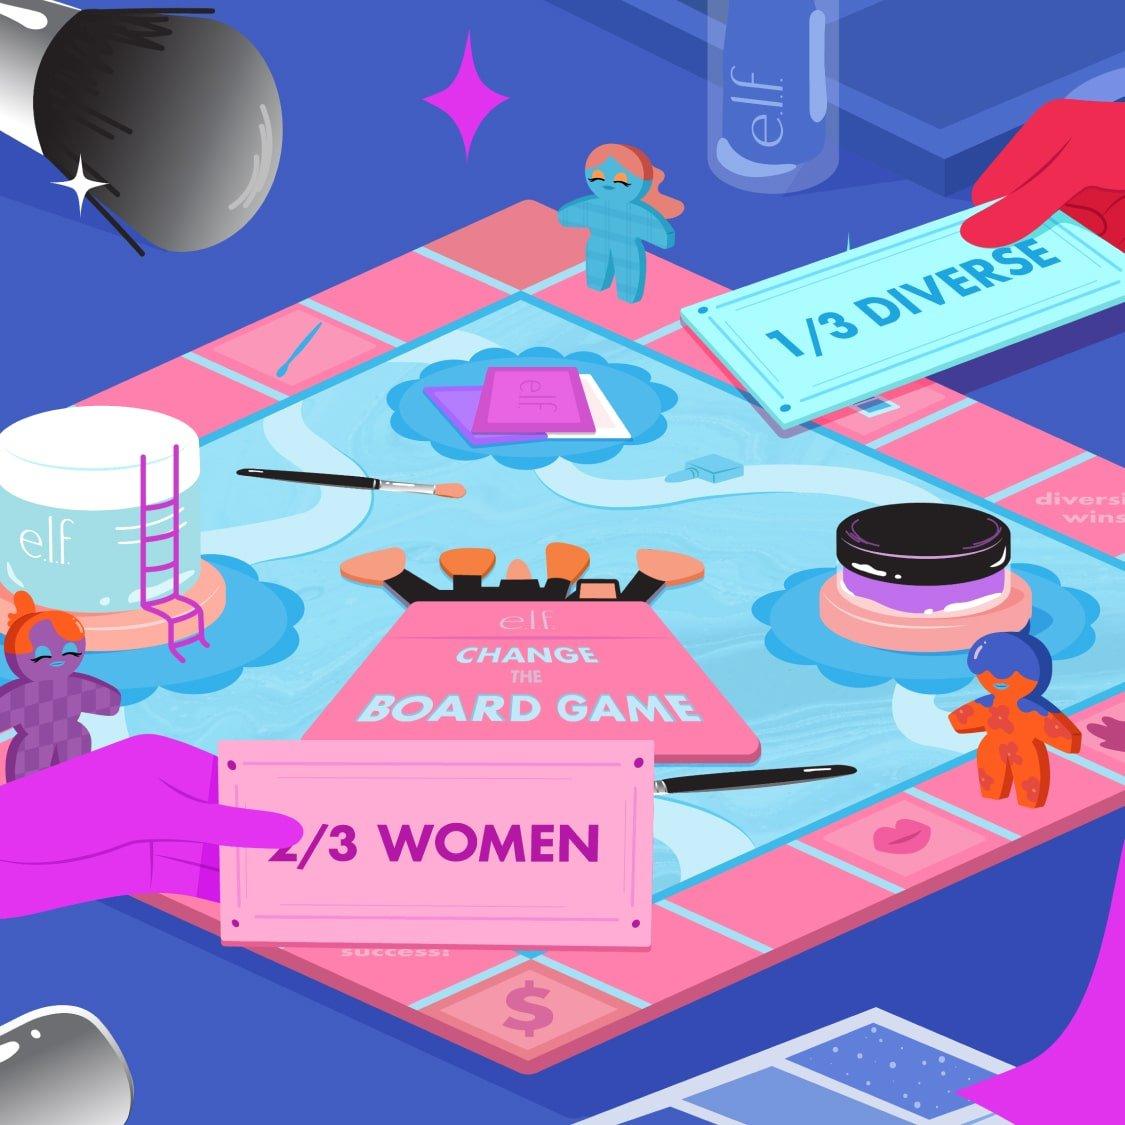 e.l.f. Change the Board Game; one-thirds diverse; two-thirds women